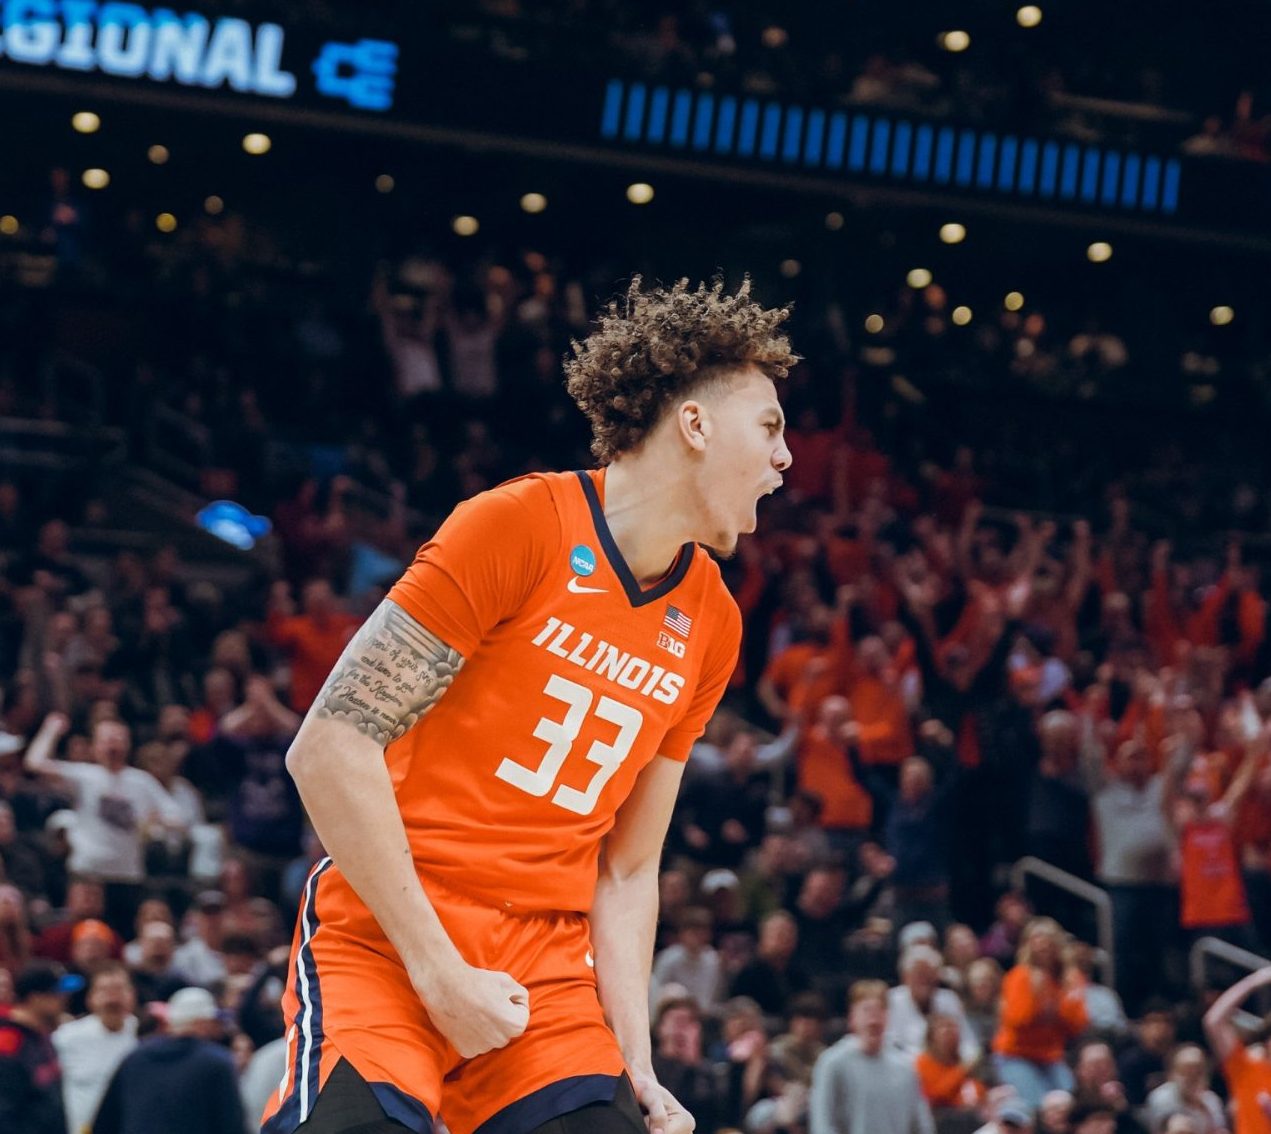 Coleman Hawkins Declares His Illini Career Over: ‘Every good thing must come to an end’ 